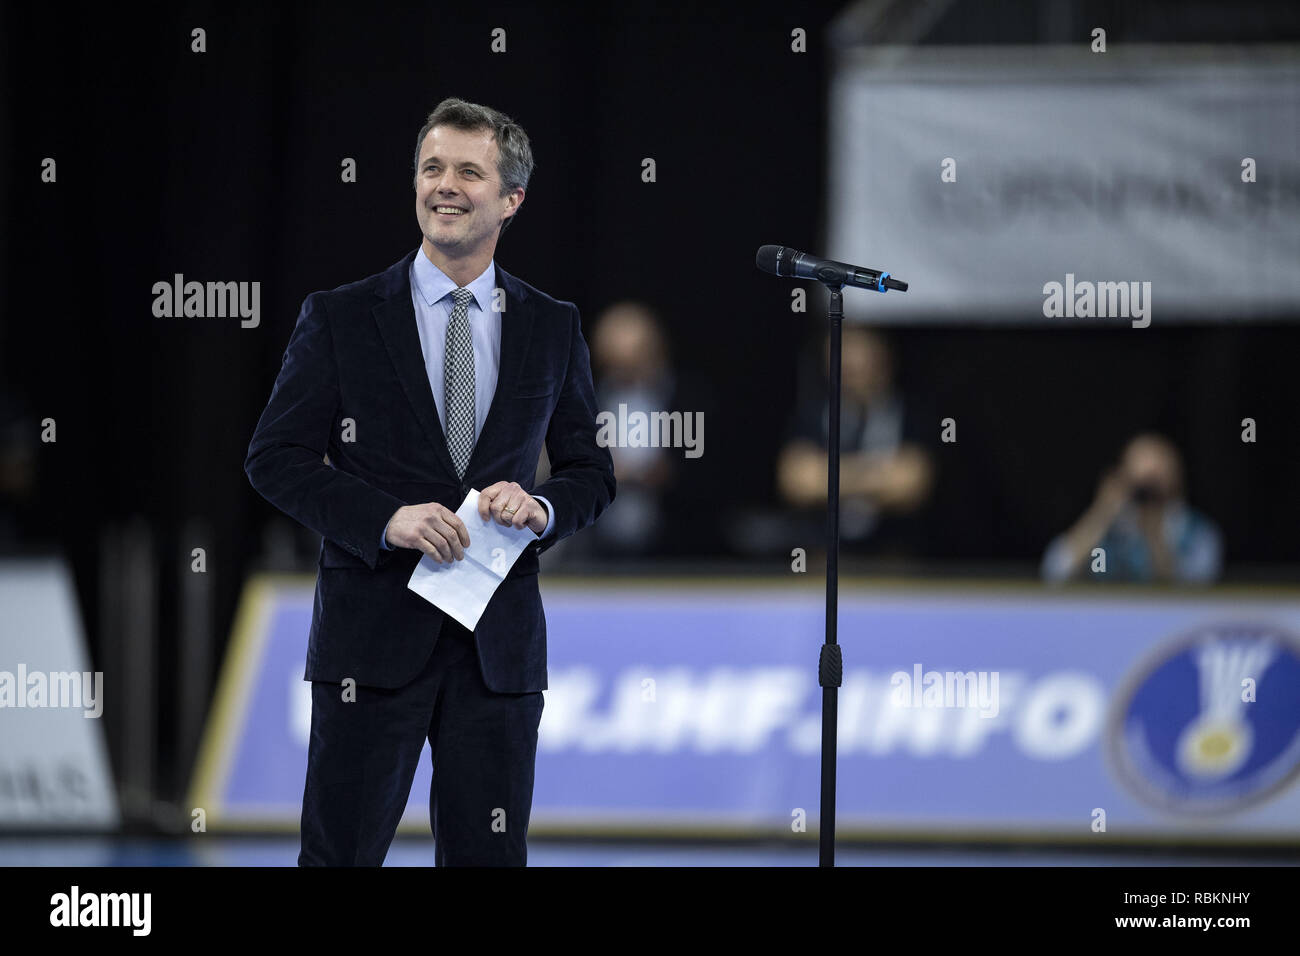 copenhagen-denmark-10th-jan-2019-crown-prince-frederik-of-denmark-is-giving-the-opening-speech-before-the-group-c-handball-match-between-denmark-and-chile-in-royal-arena-in-copenhagen-denmark-during-the-2019-ihf-handball-world-championship-in-germanydenmark-credit-lars-moellerzuma-wirealamy-live-news-RBKNHY.jpg